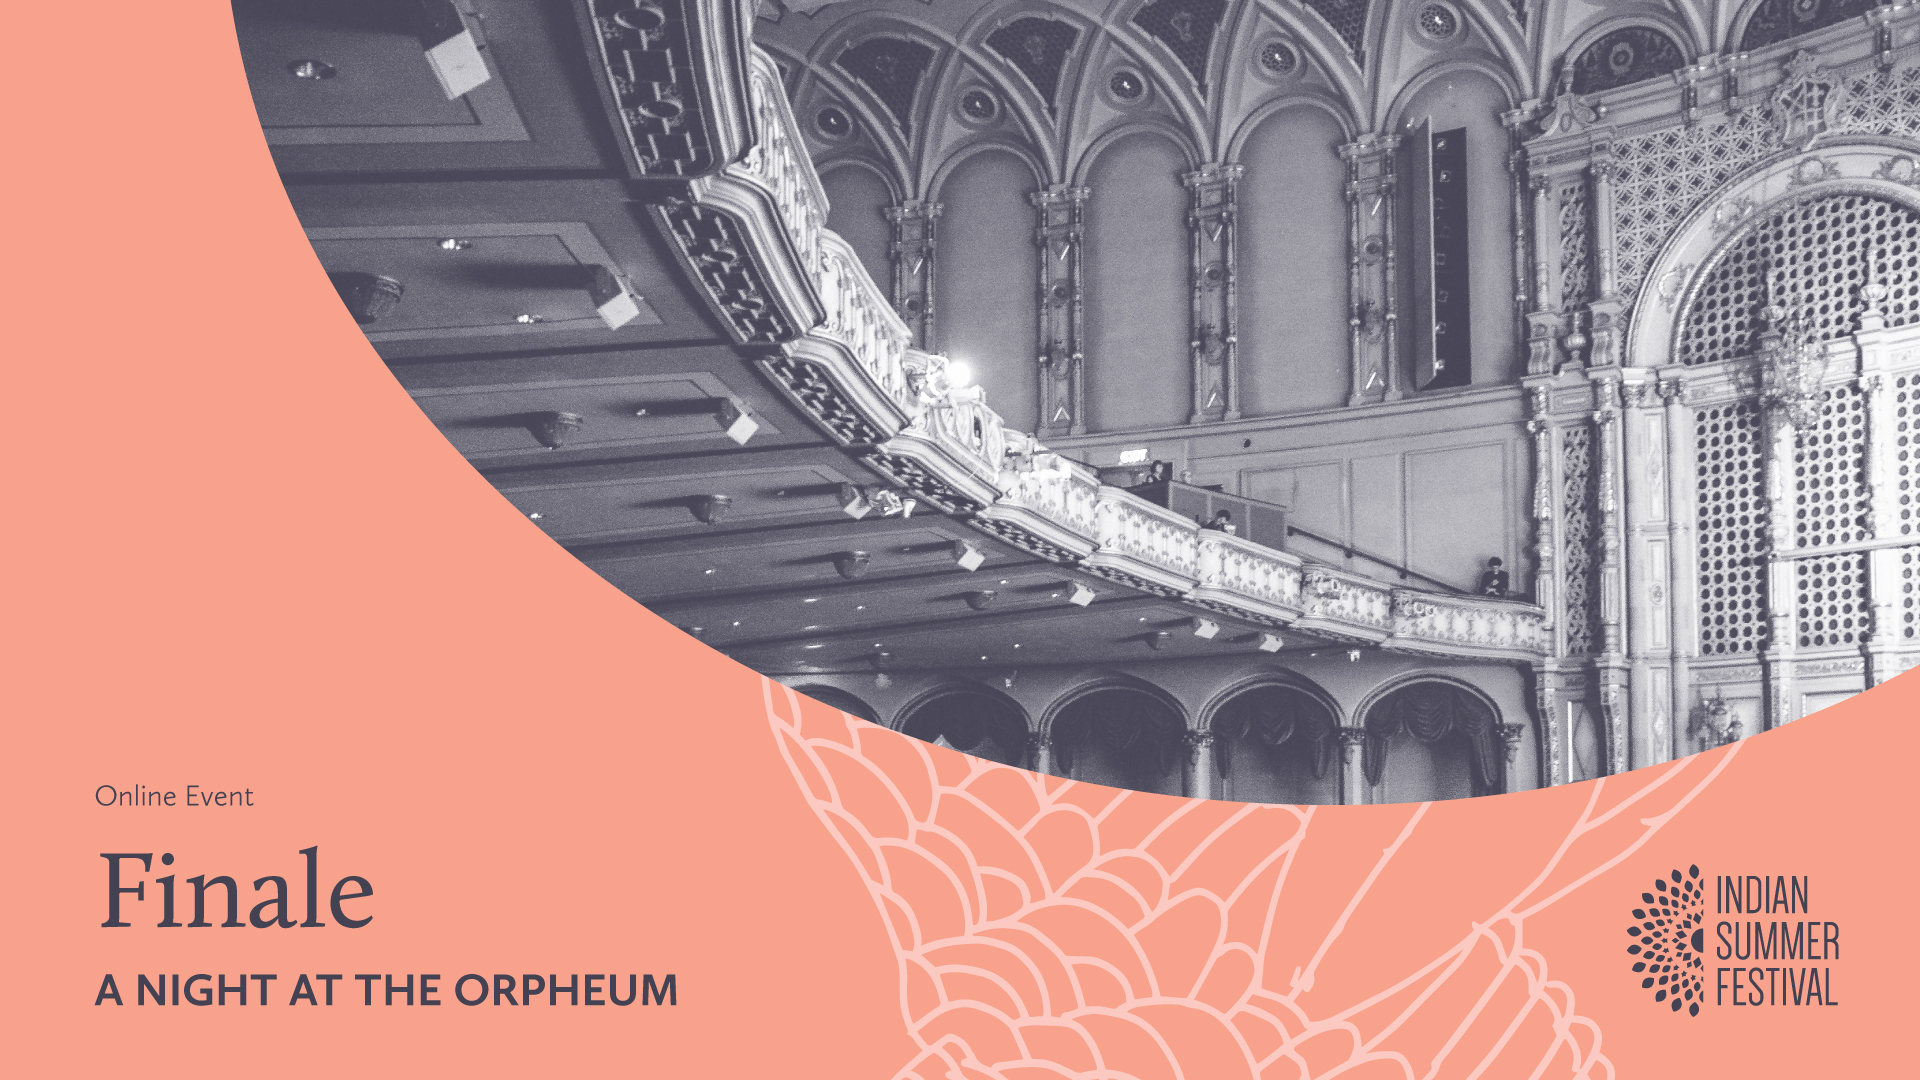 Online event banner for Finale night featuring a black and white photo of the interior of the Orpheum theatre. Text reads: Finale, A night at the Orpheum.